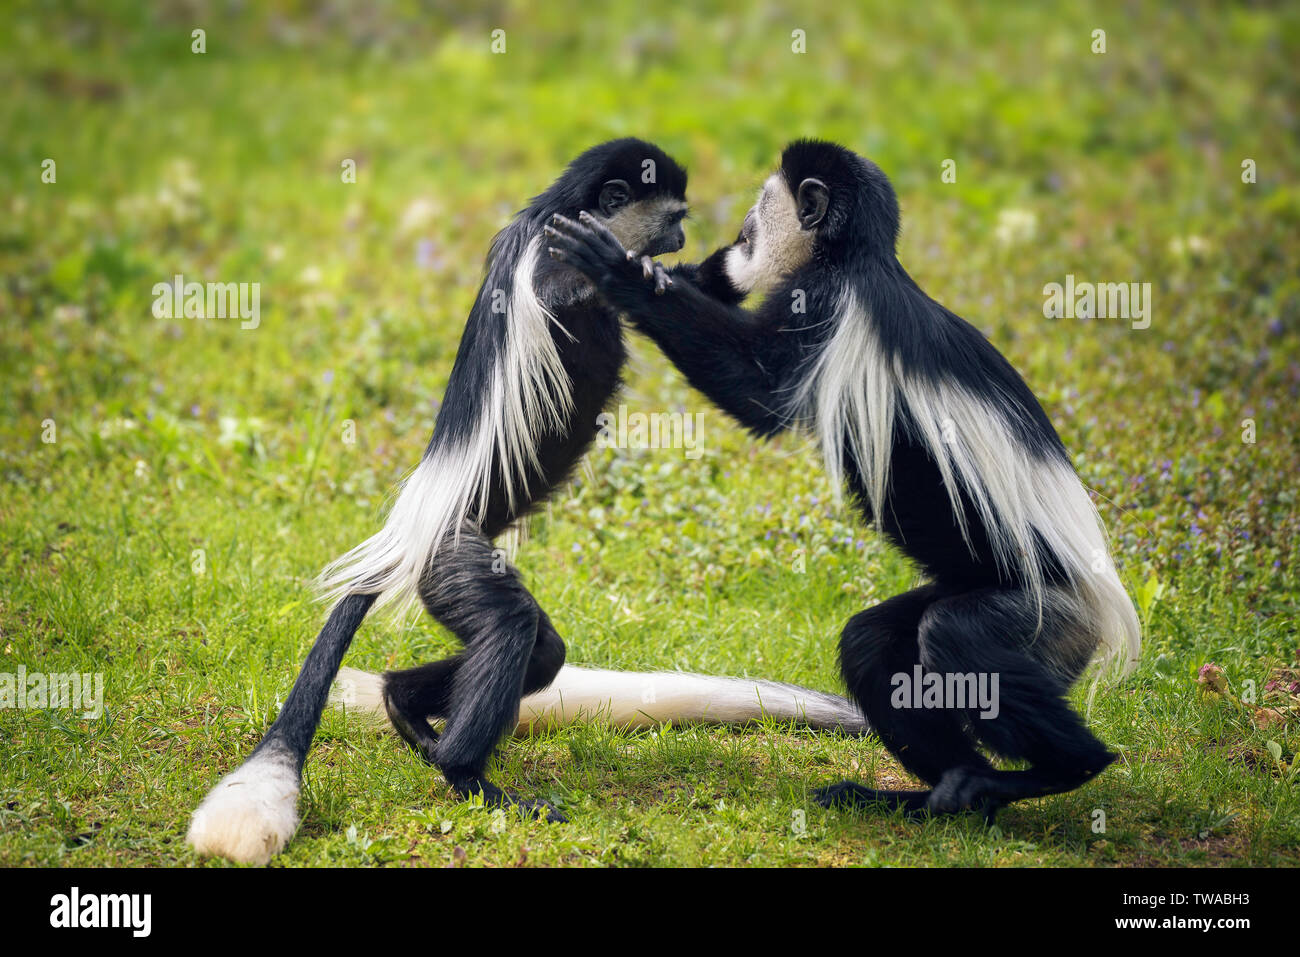 Two Mantled guereza monkeys fighting in grass Stock Photo